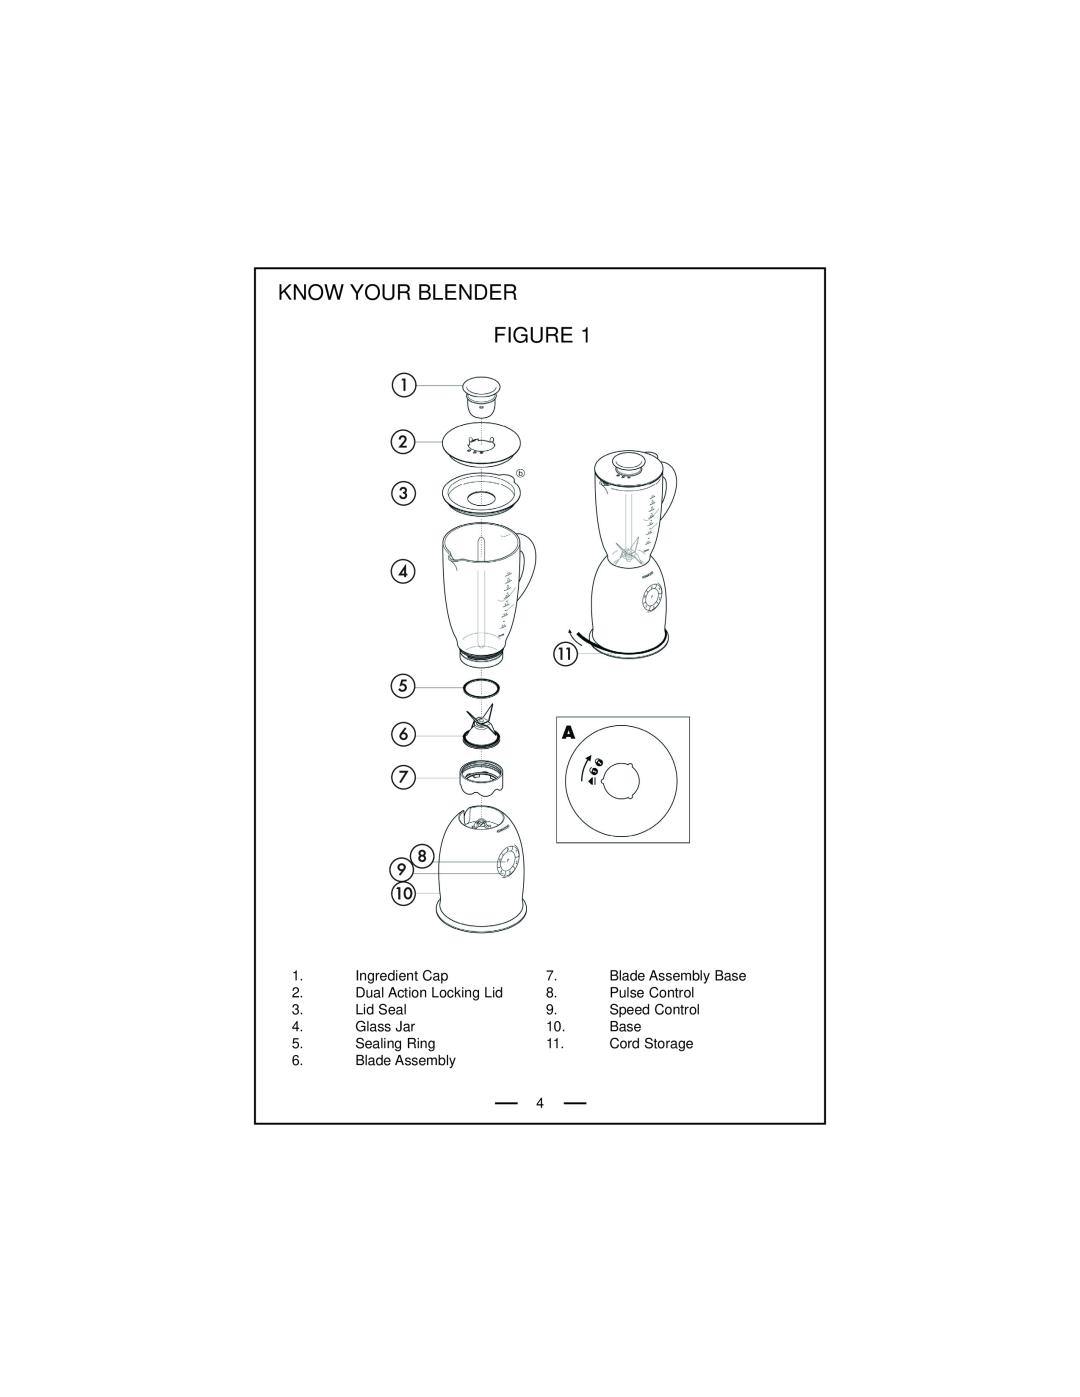 DeLonghi DBL740 Series instruction manual Know Your Blender Figure 